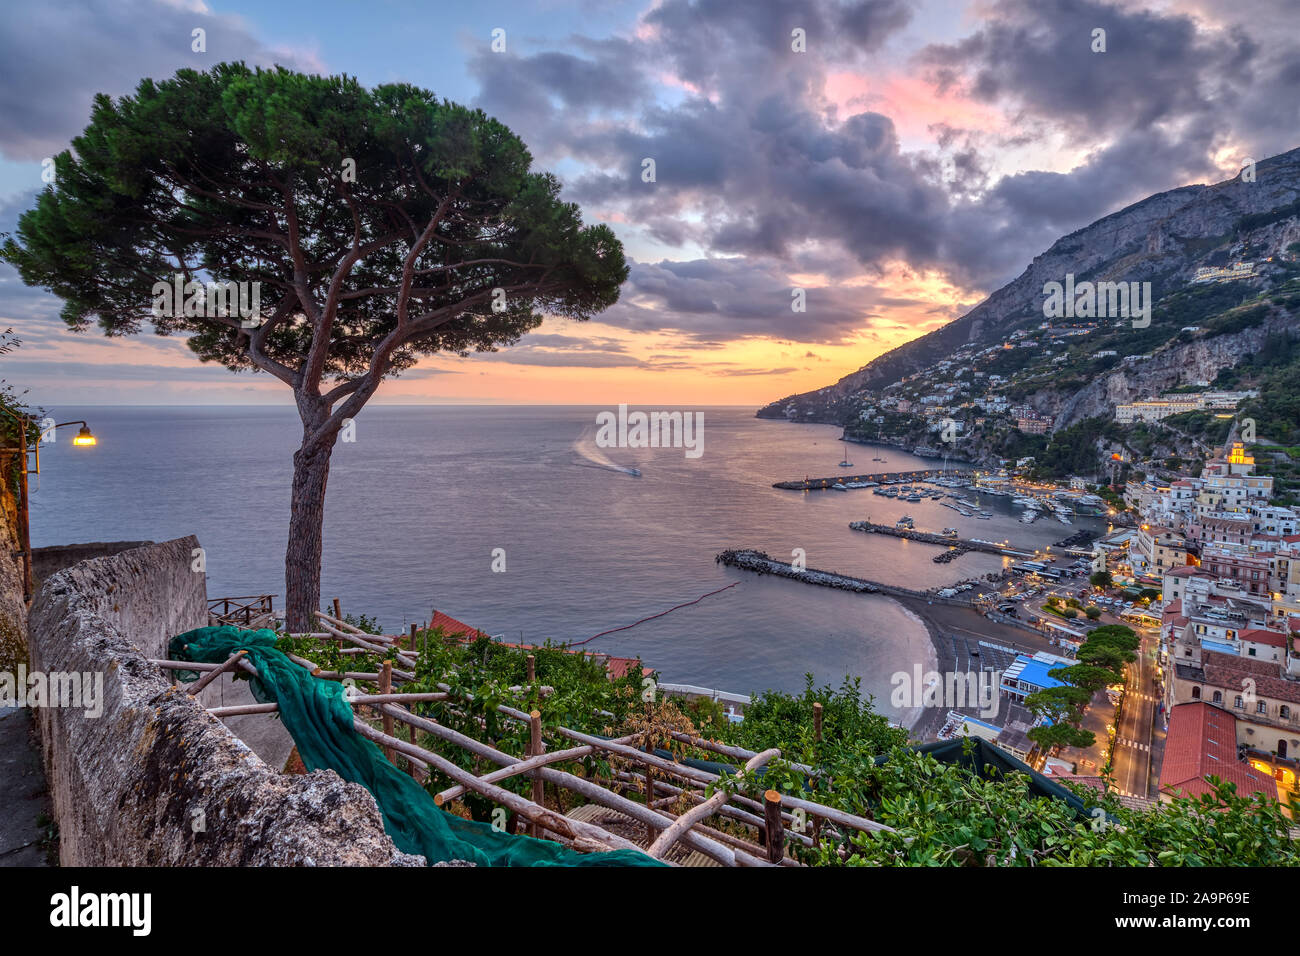 View of Amalfi in Italy at sunset with a lone pine tree Stock Photo